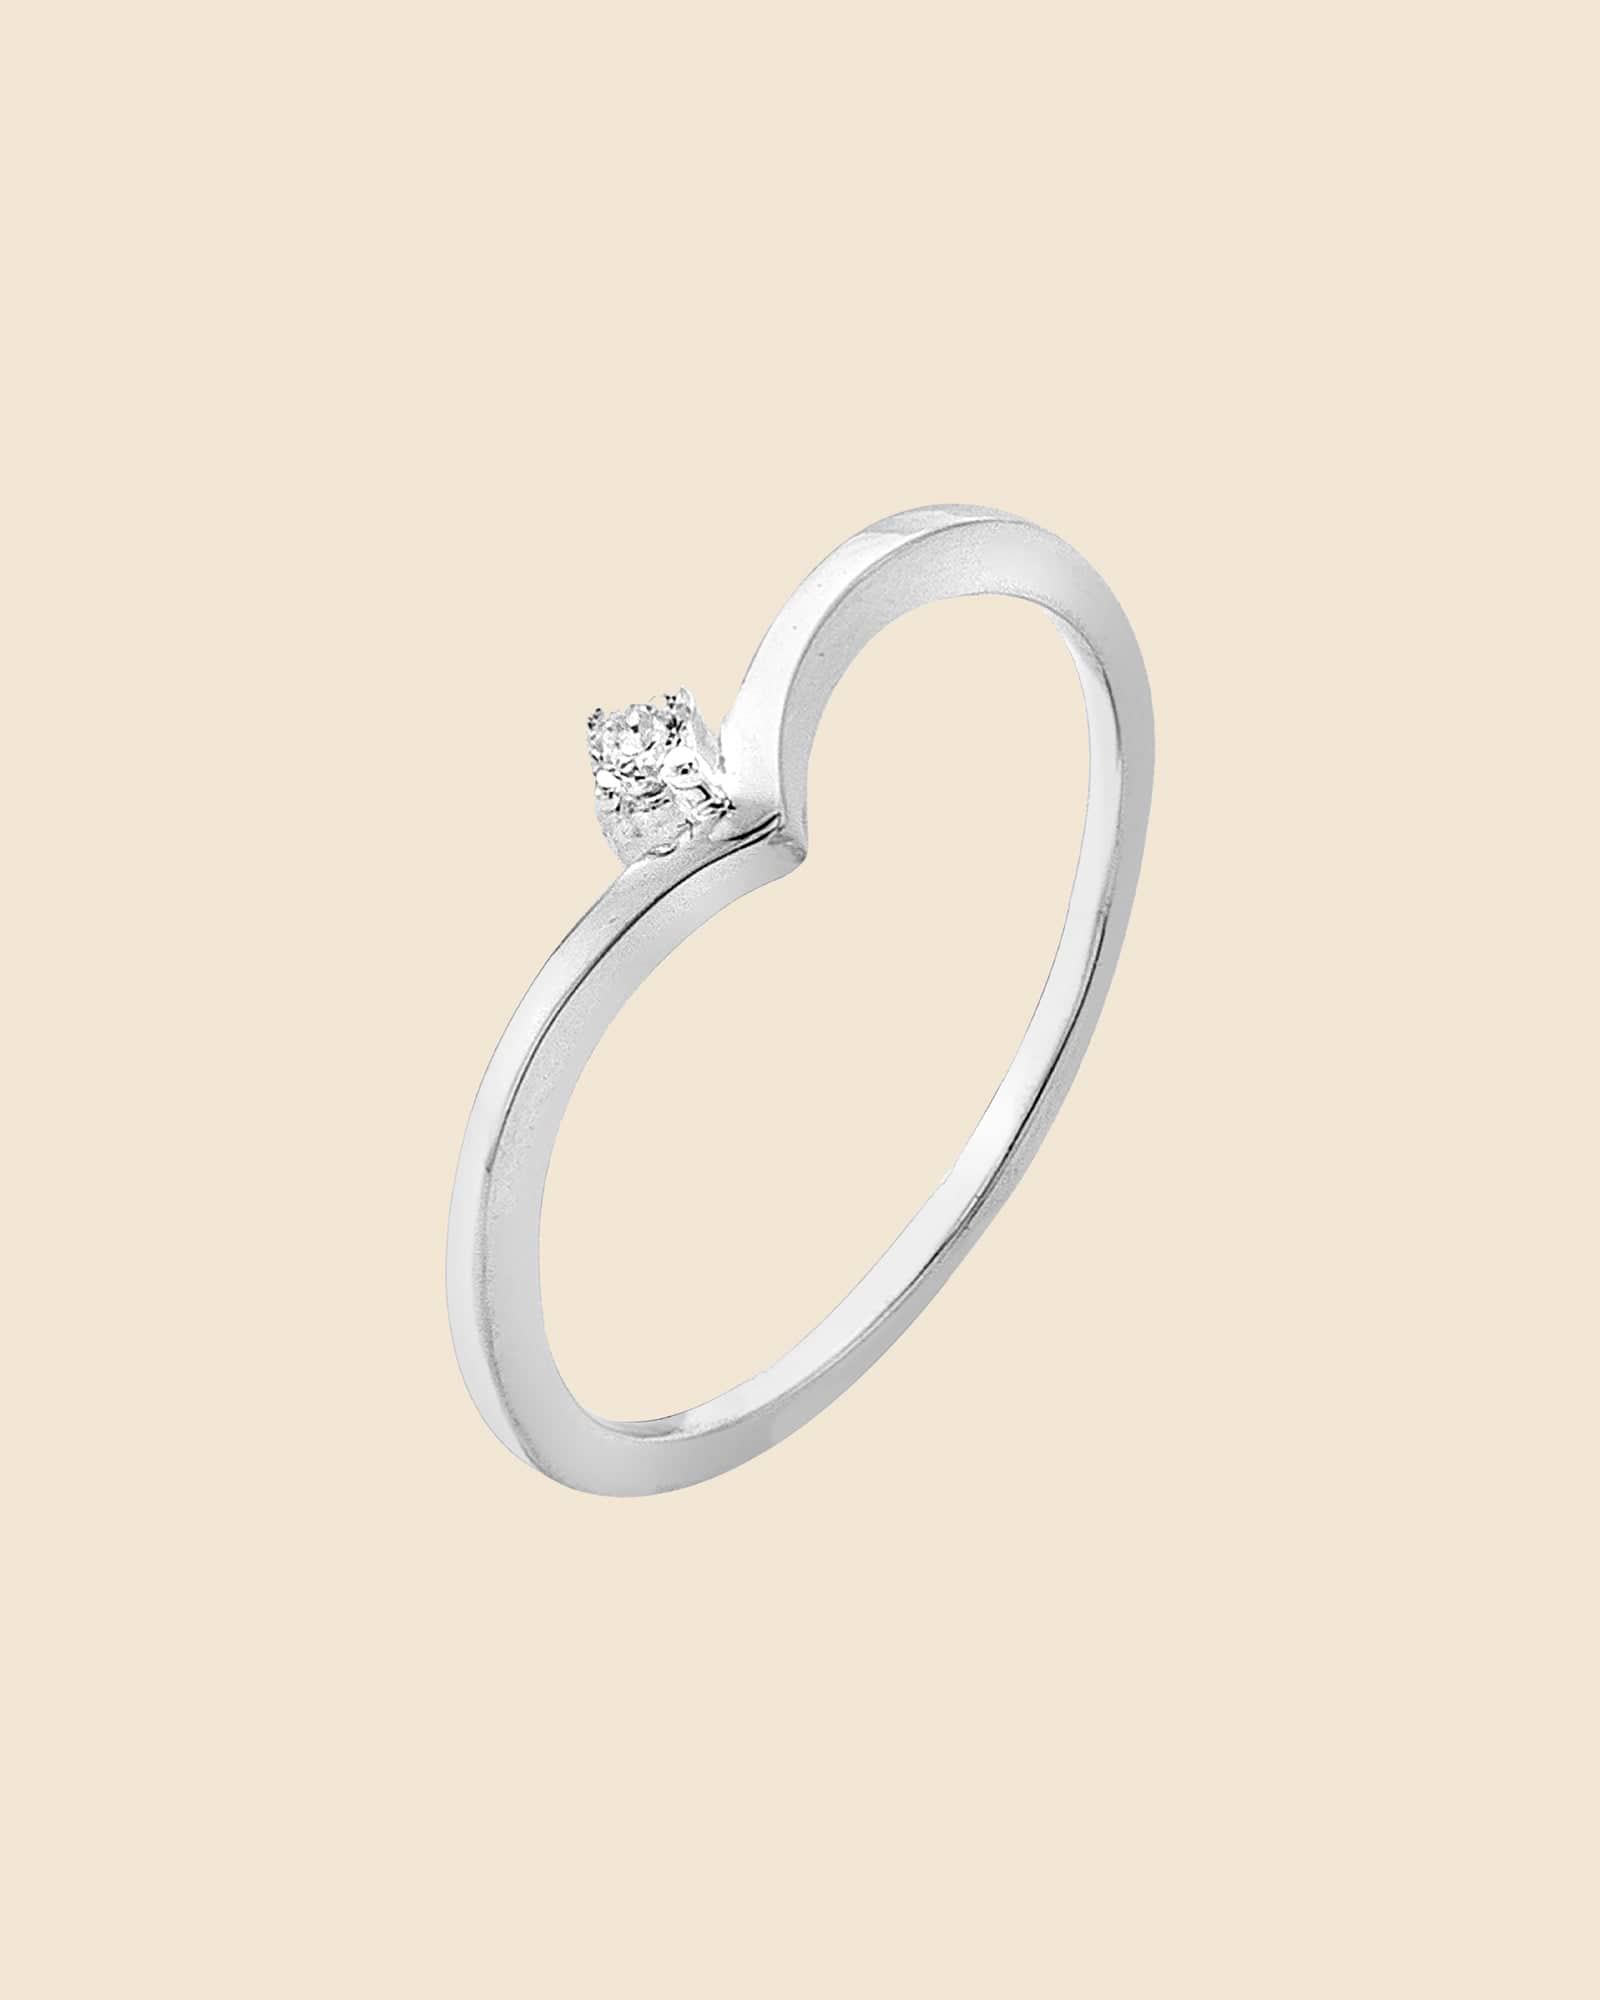 Sterling Silver Wishbone Ring with Cubic Zirconia Stone